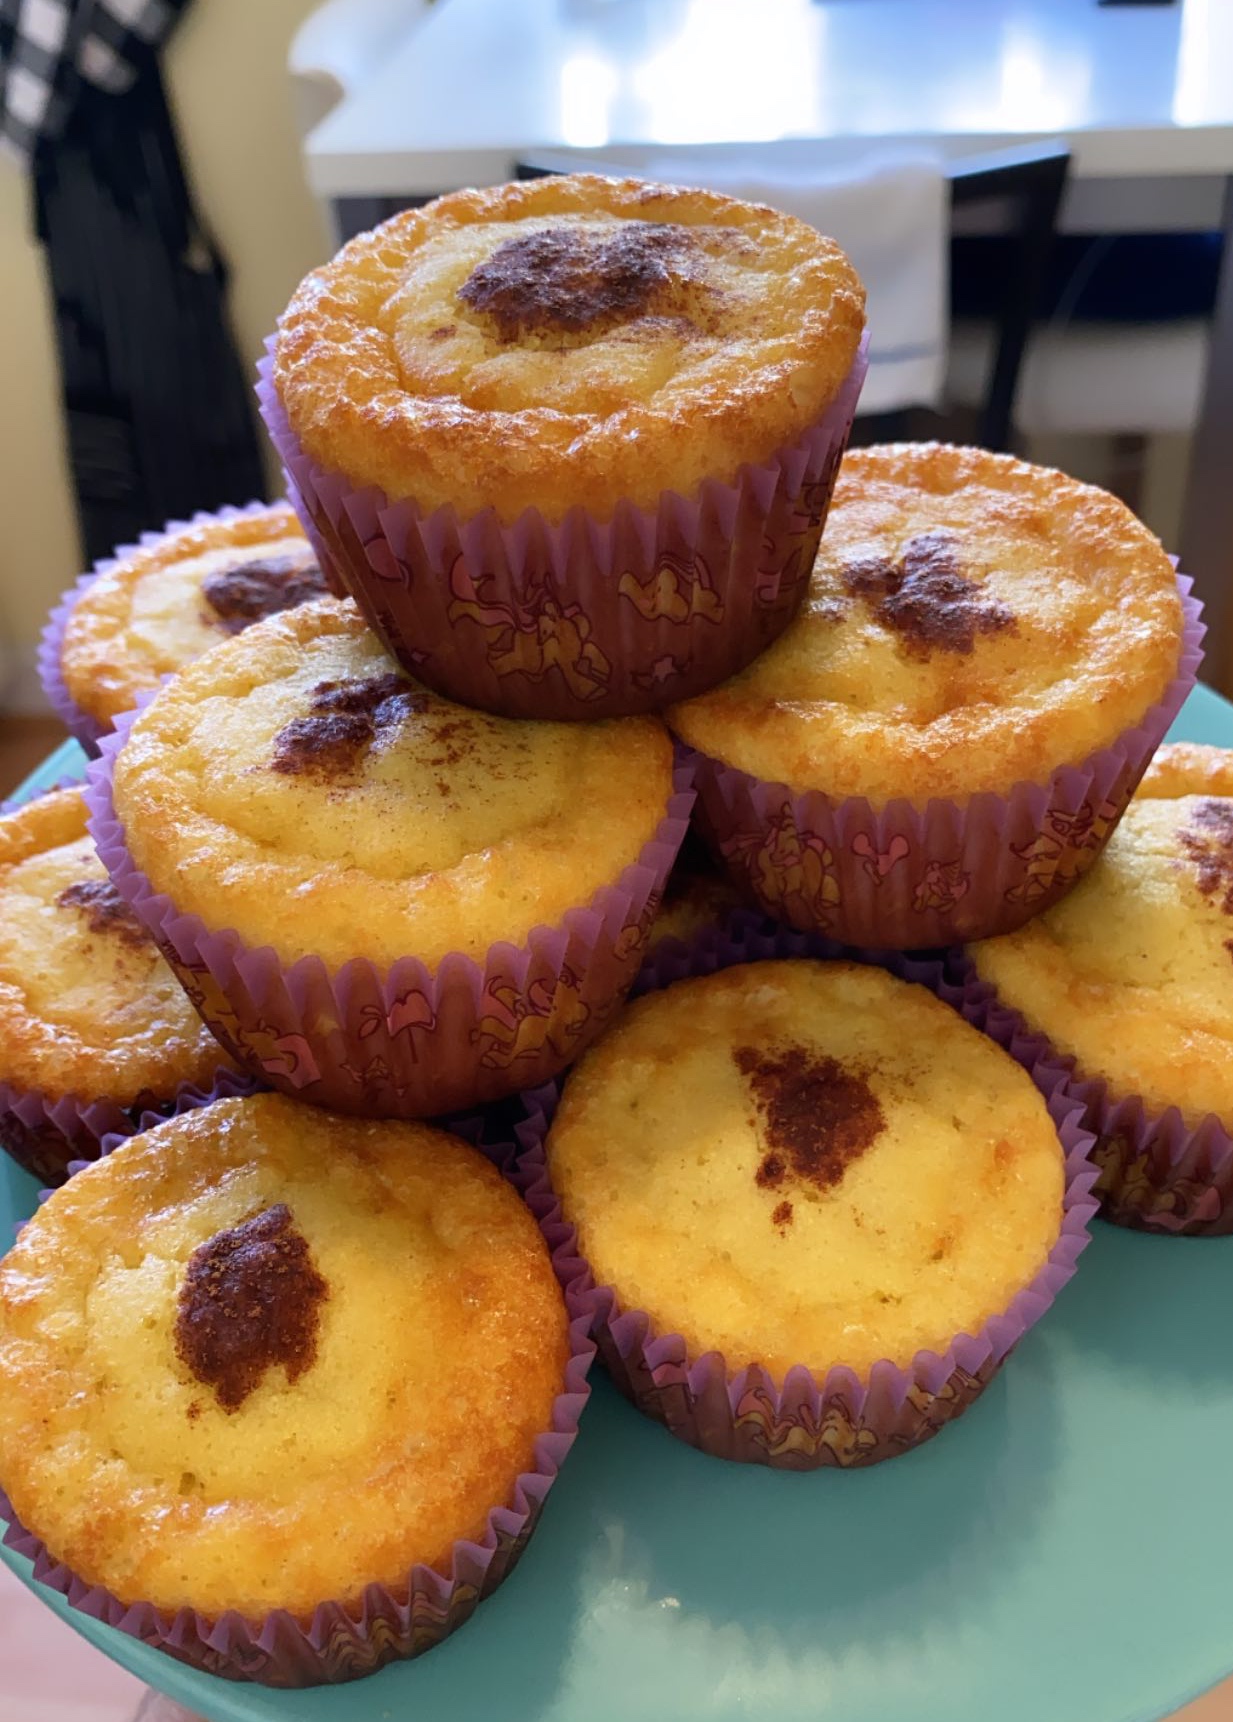 Coconut Flour Blueberry Muffins from Jonathan (Tasty and Keto!)